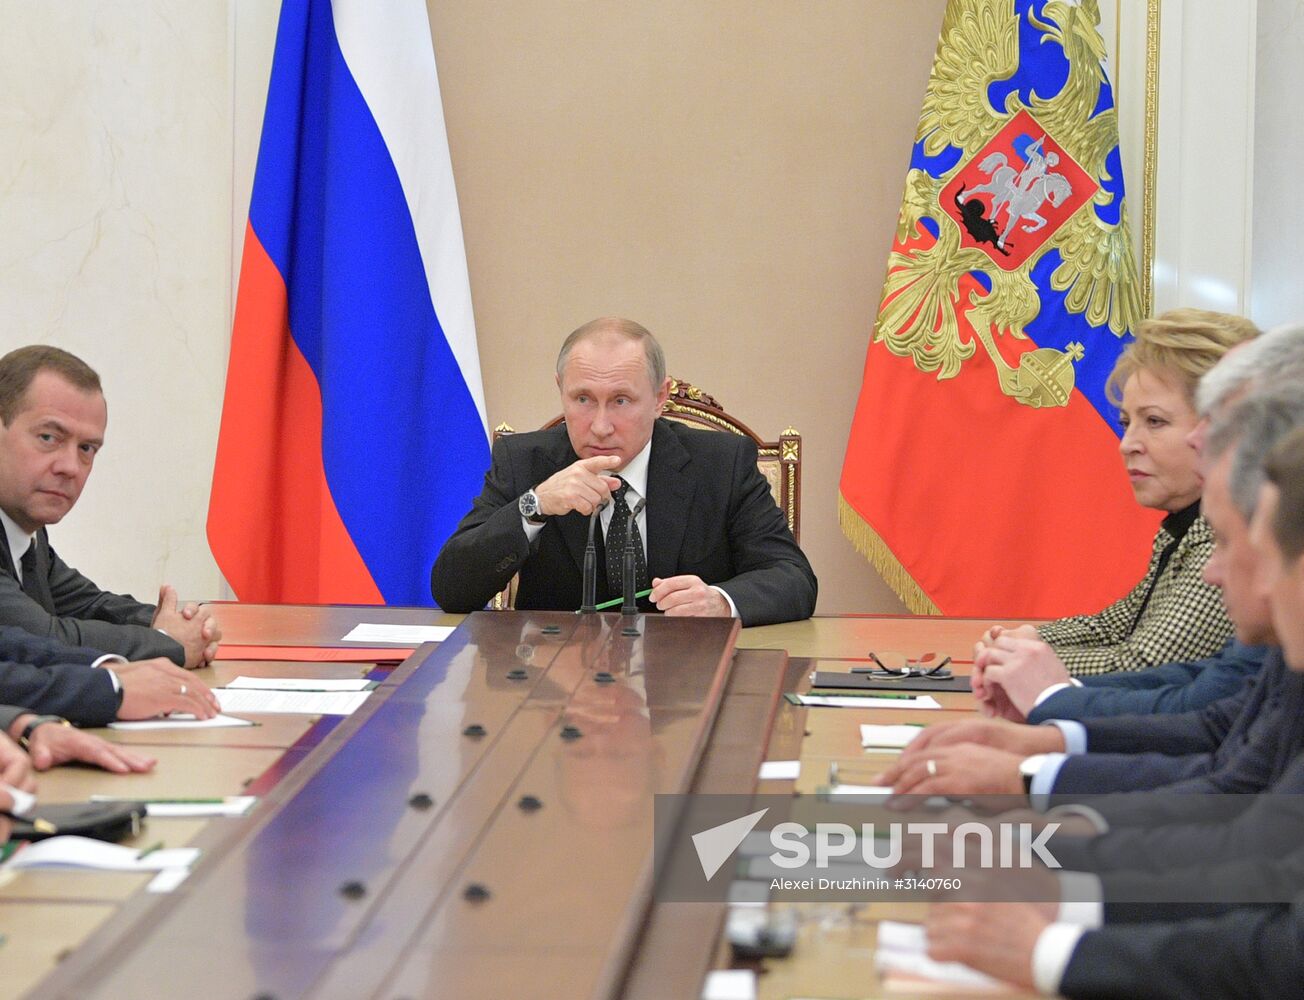 President Vladimir Putin conducts Russian Security Council meeting